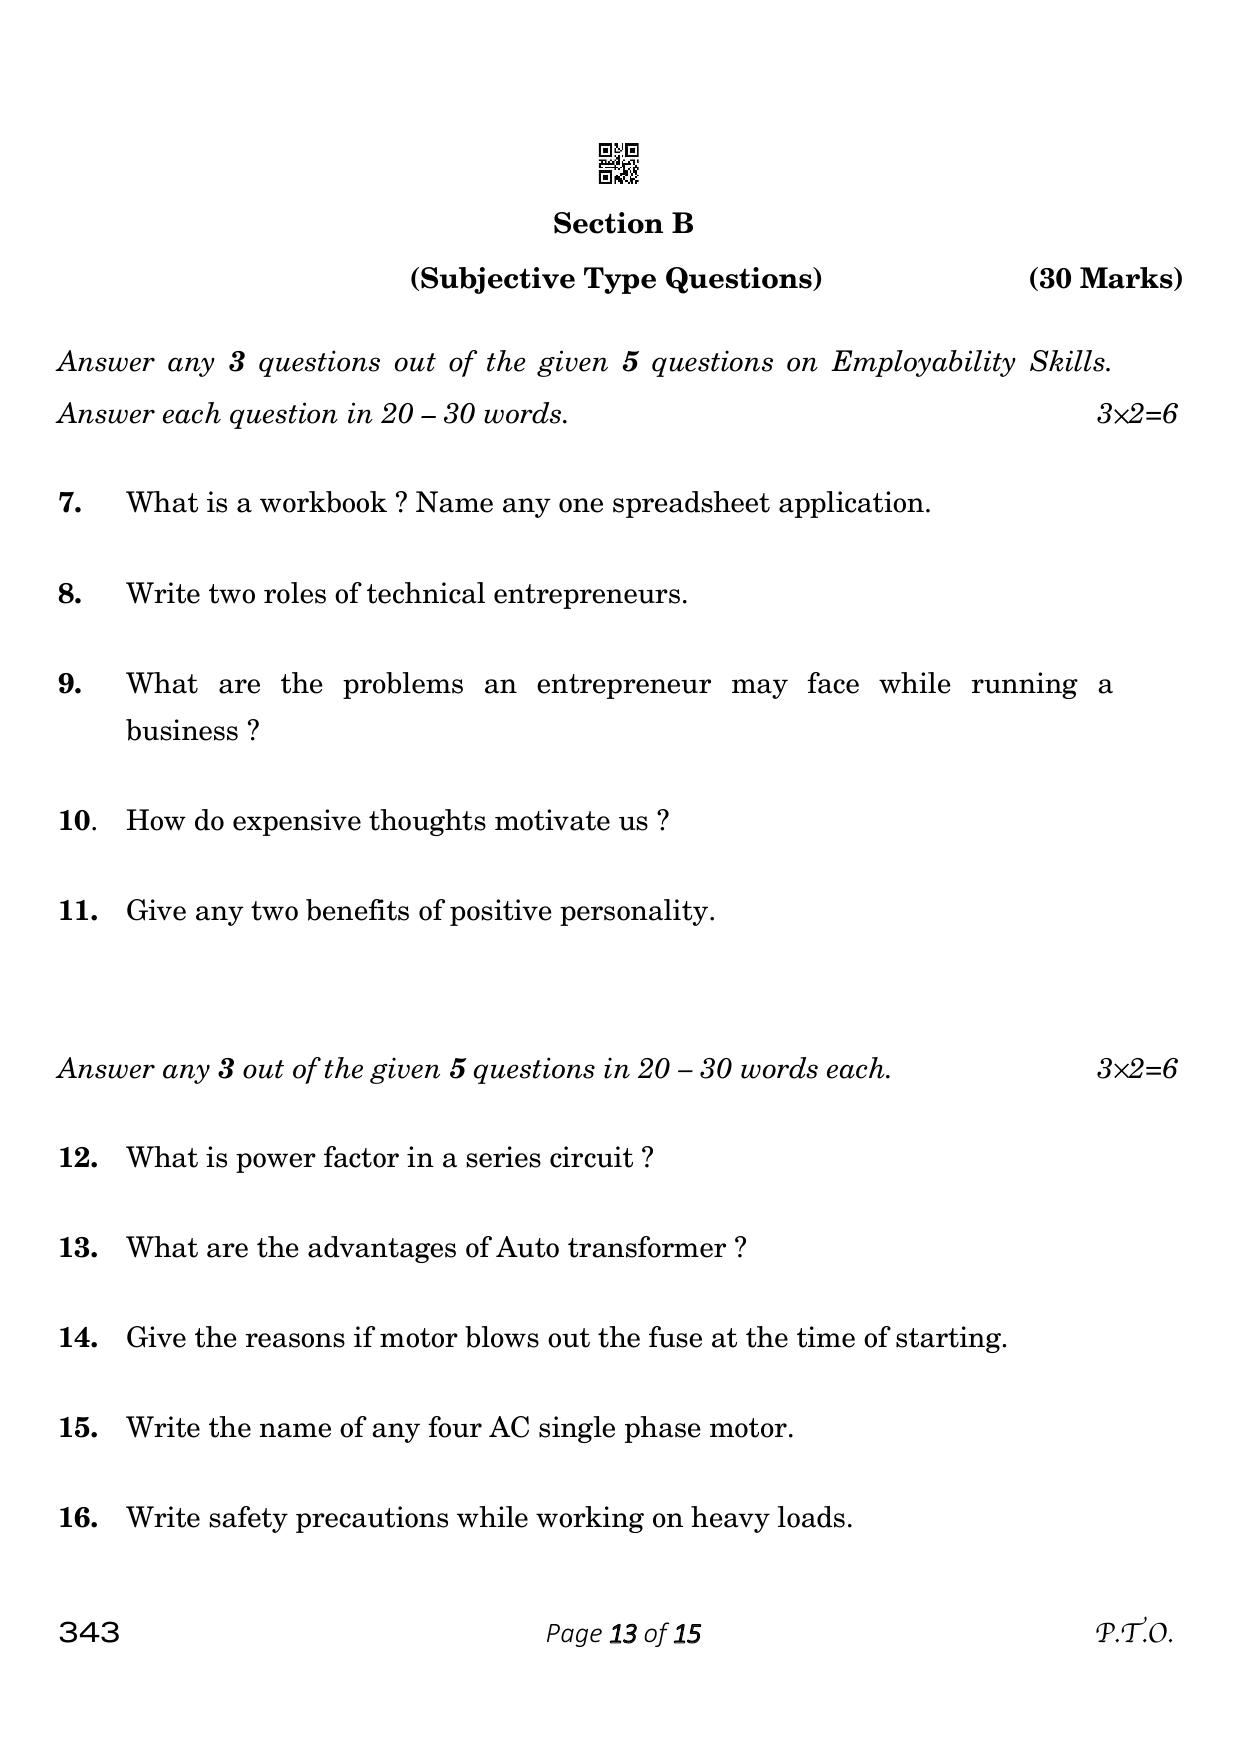 CBSE Class 12 343_Electrical Technology 2023 Question Paper - Page 13